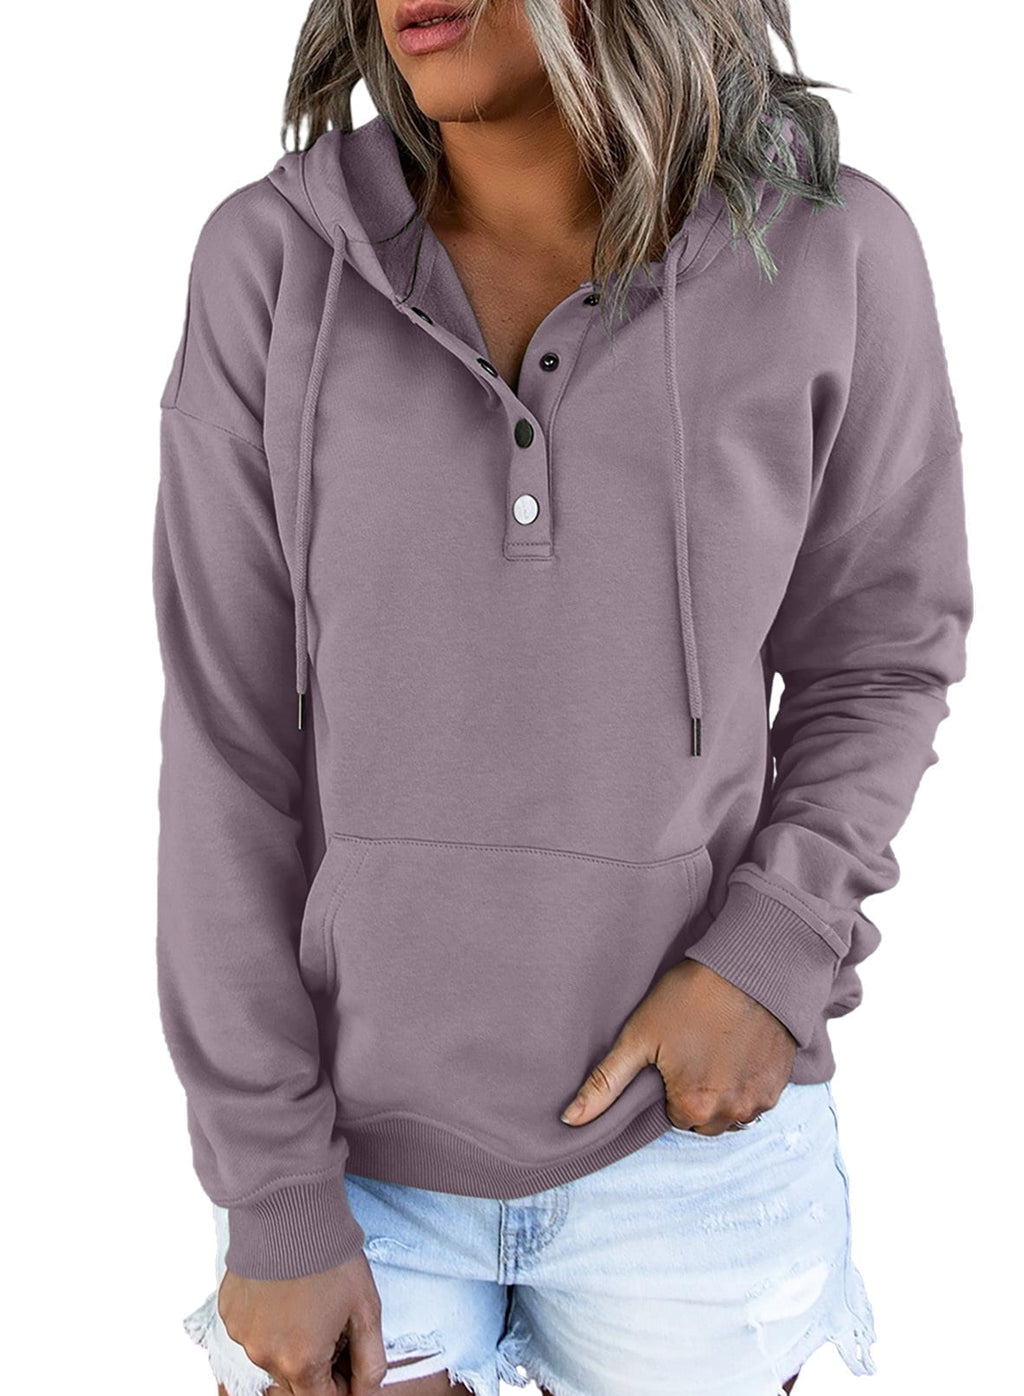 Blibea Women's Hoodie Sweatshirt Long Sleeve 1/4 Button Closure Drawstring Pullover Hooded Tops - image 1 of 8